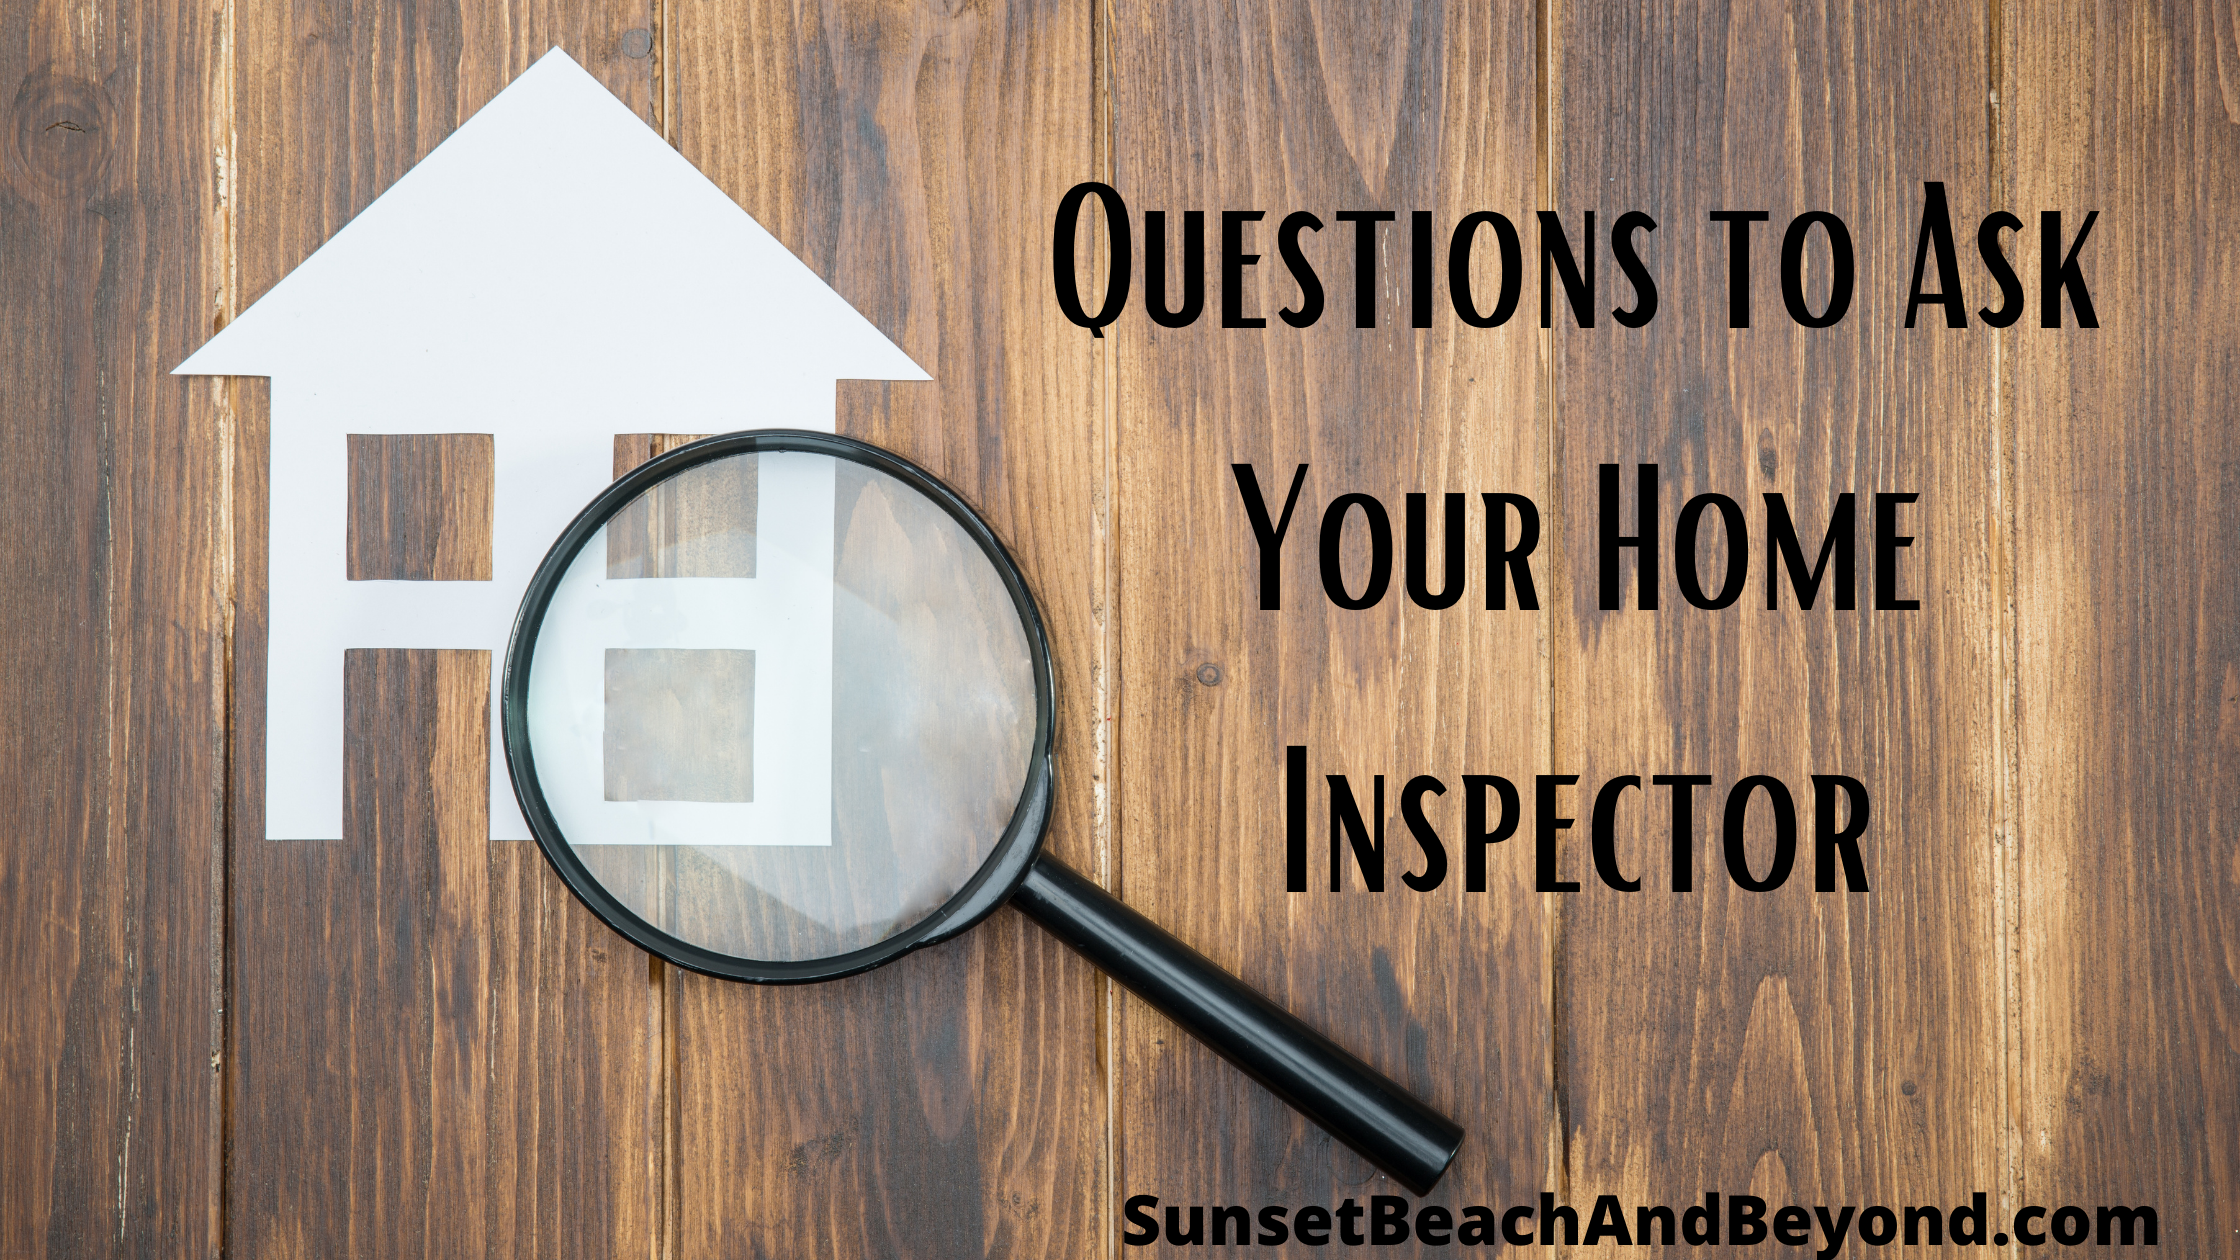 Questions to Ask Your Home Inspector